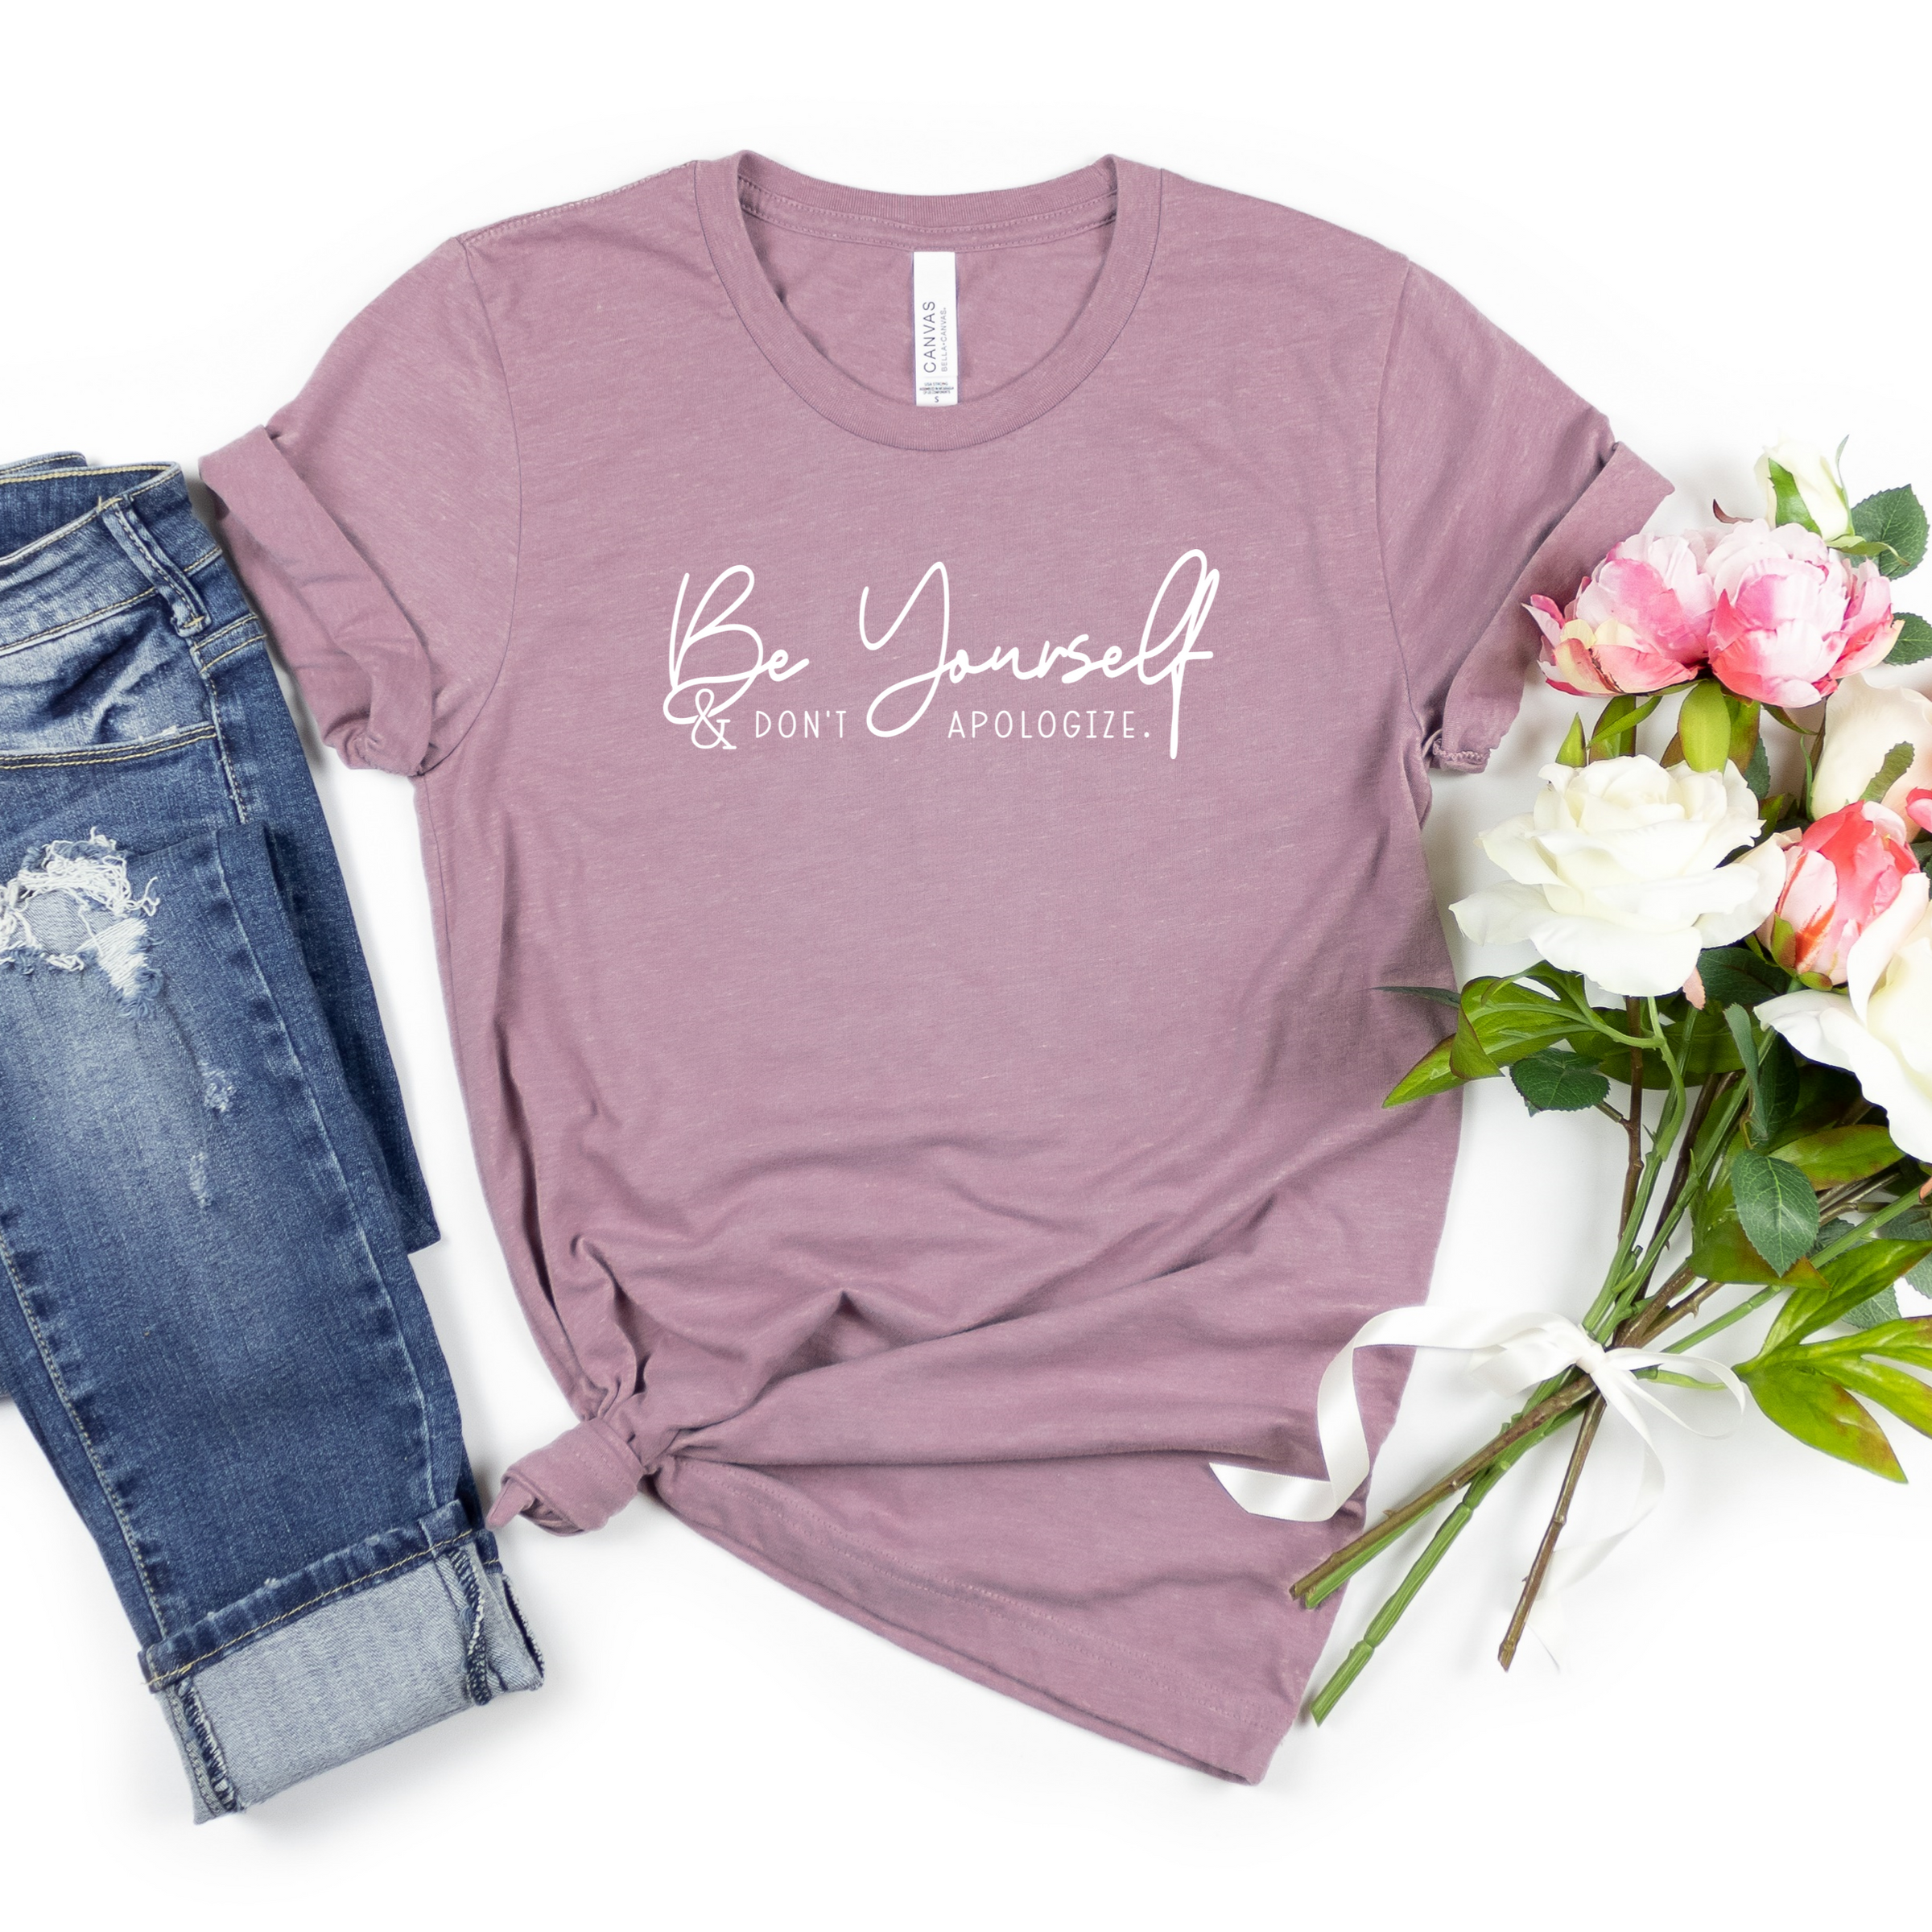 Be yourself & don't apologize in white heat transfer vinyl on a Bella Canvas heather orchid tee. Part of Moxie Momma's inspirational line.